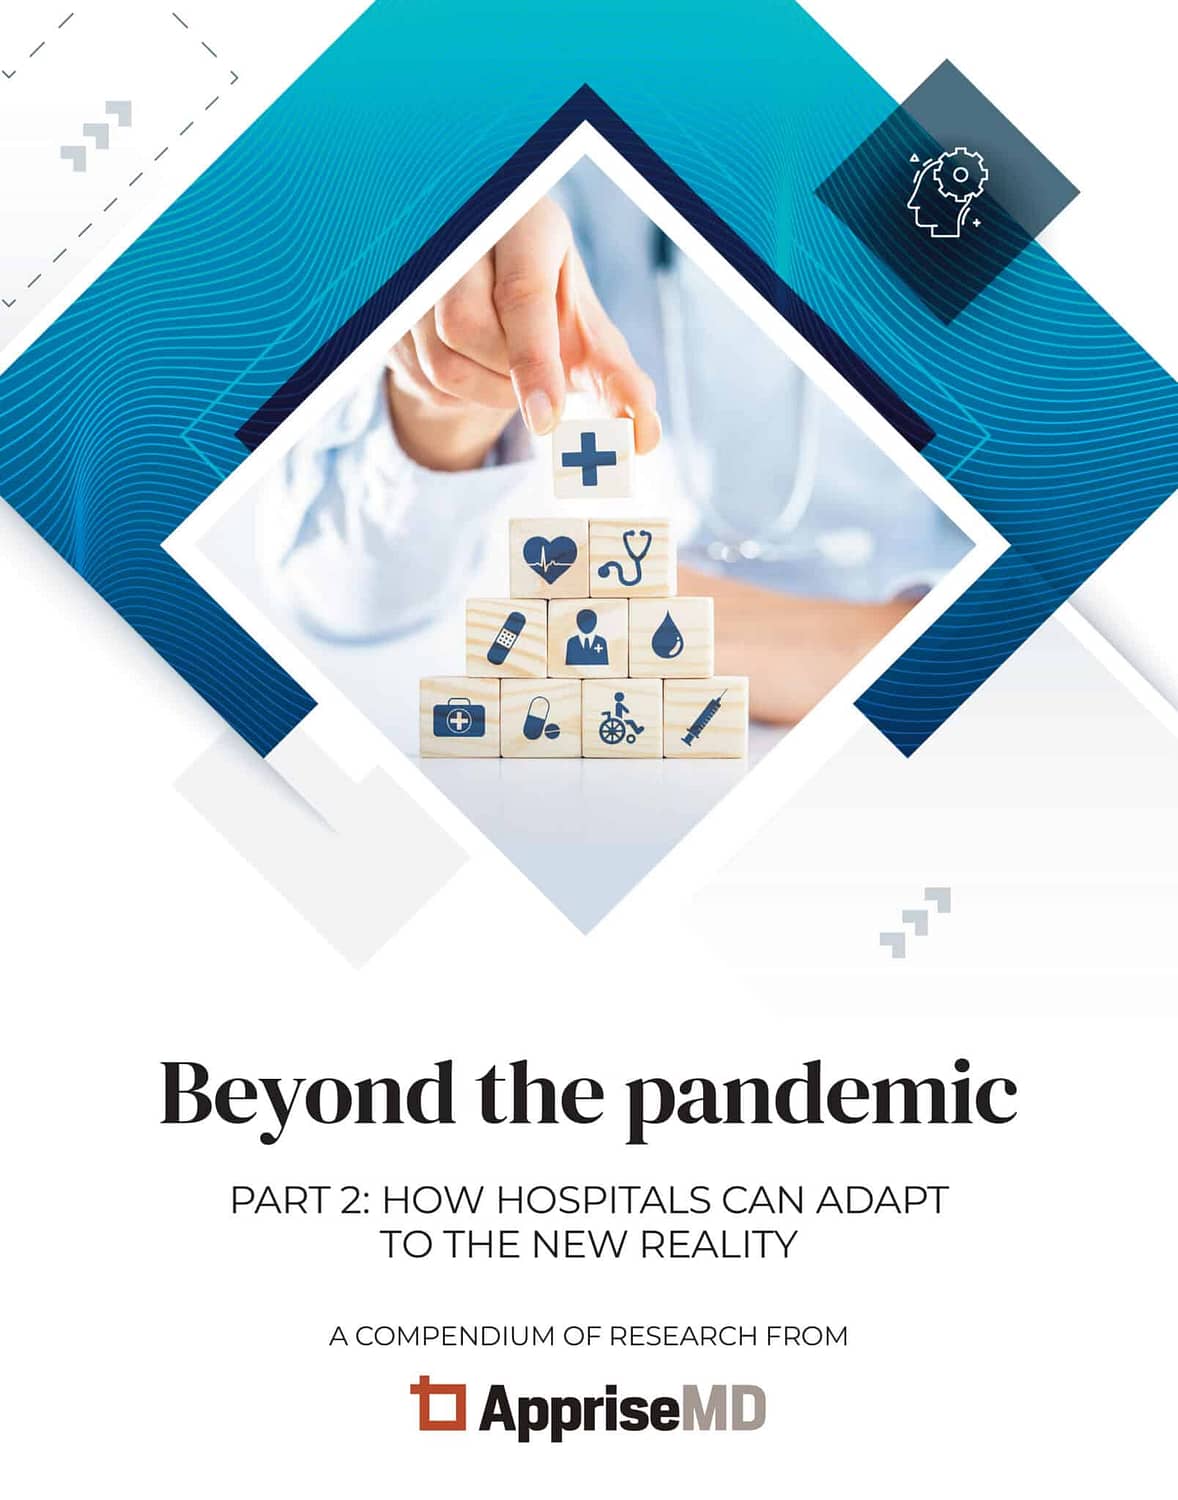 Beyond the Pandemic Part 2 How hospitals adapt to the new reality, a compendium of research from AppriseMD